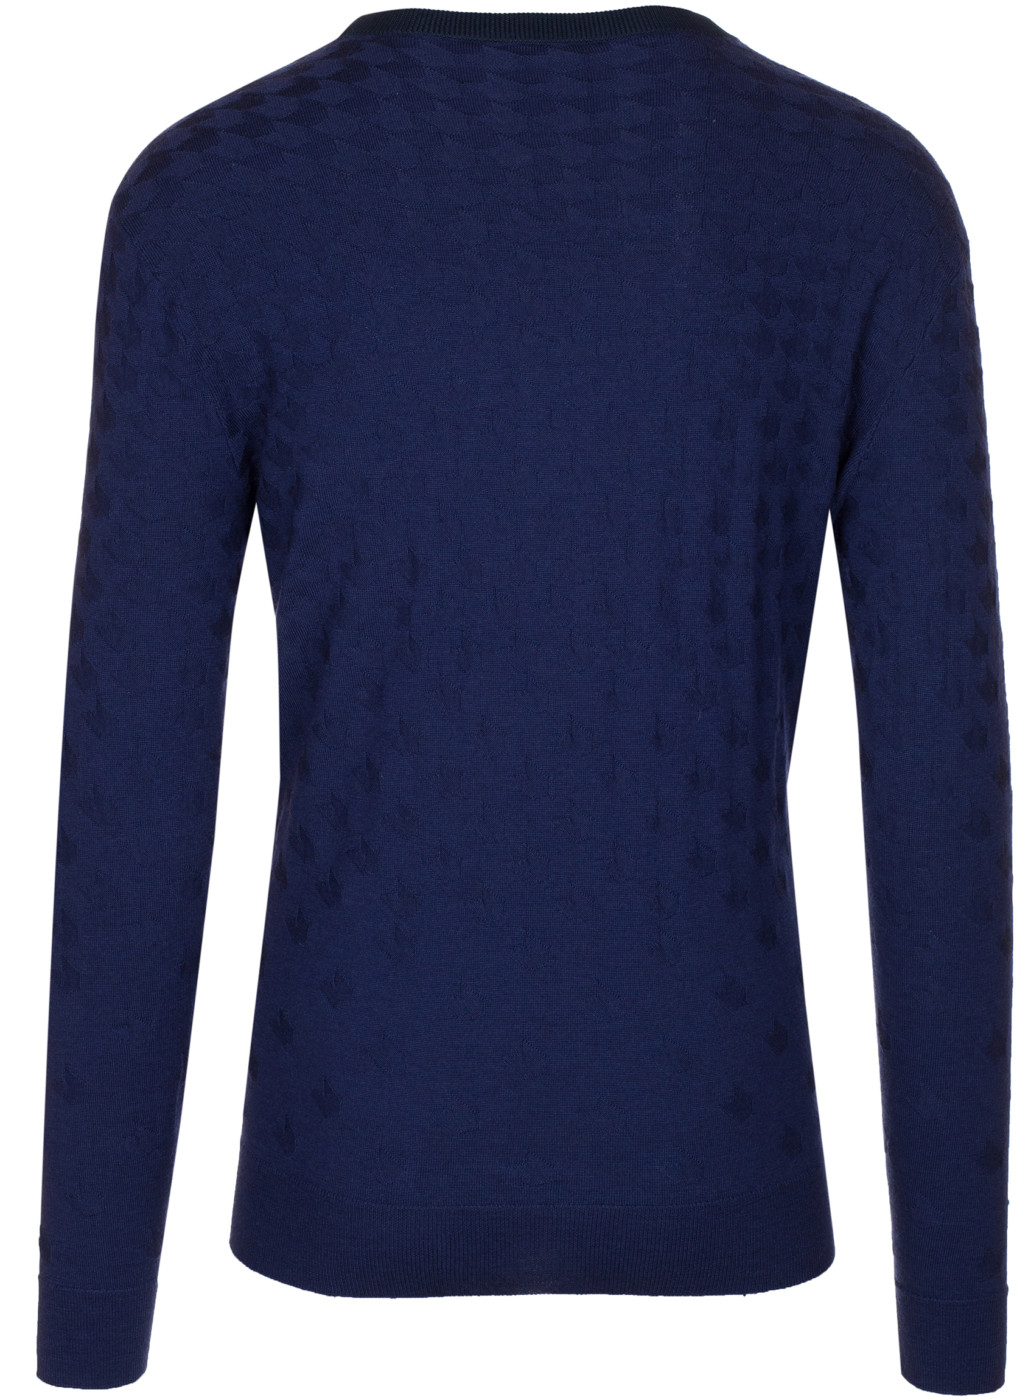 woocommerce-673321-2209615.cloudwaysapps.com-armani-collezioni-mens-navy-blue-100-wool-textured-knitwear-pullover-sweater